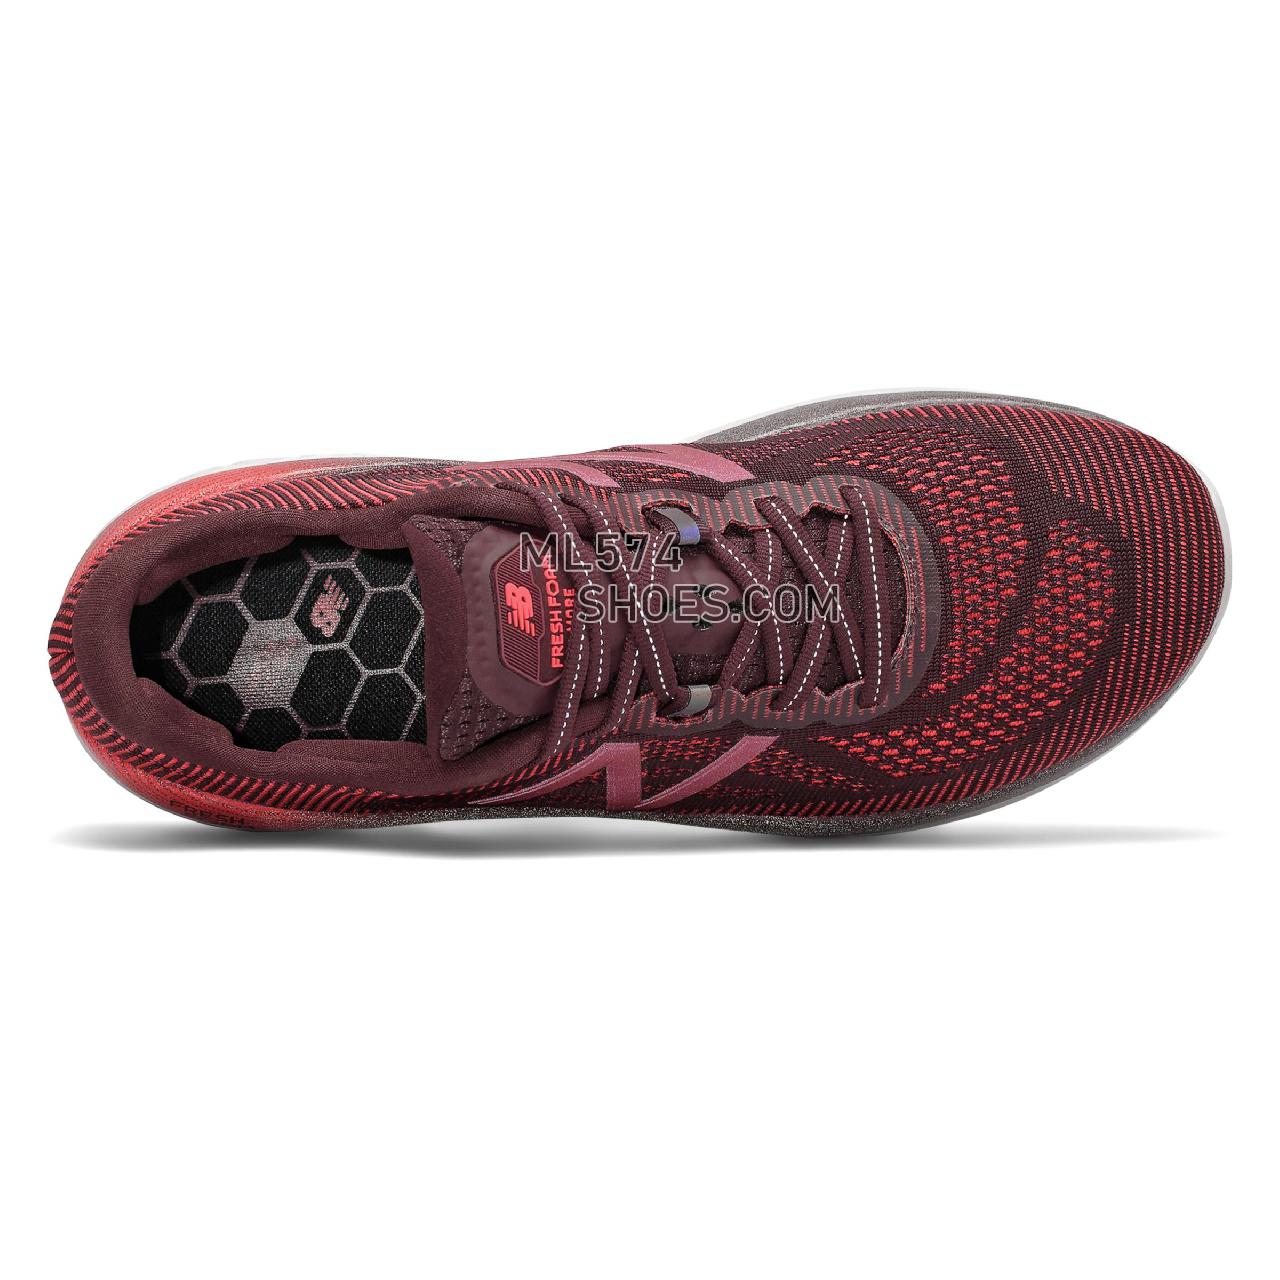 New Balance Fresh Foam More - Men's Neutral Running - Henna with Energy Red and Burgundy - MMORHN